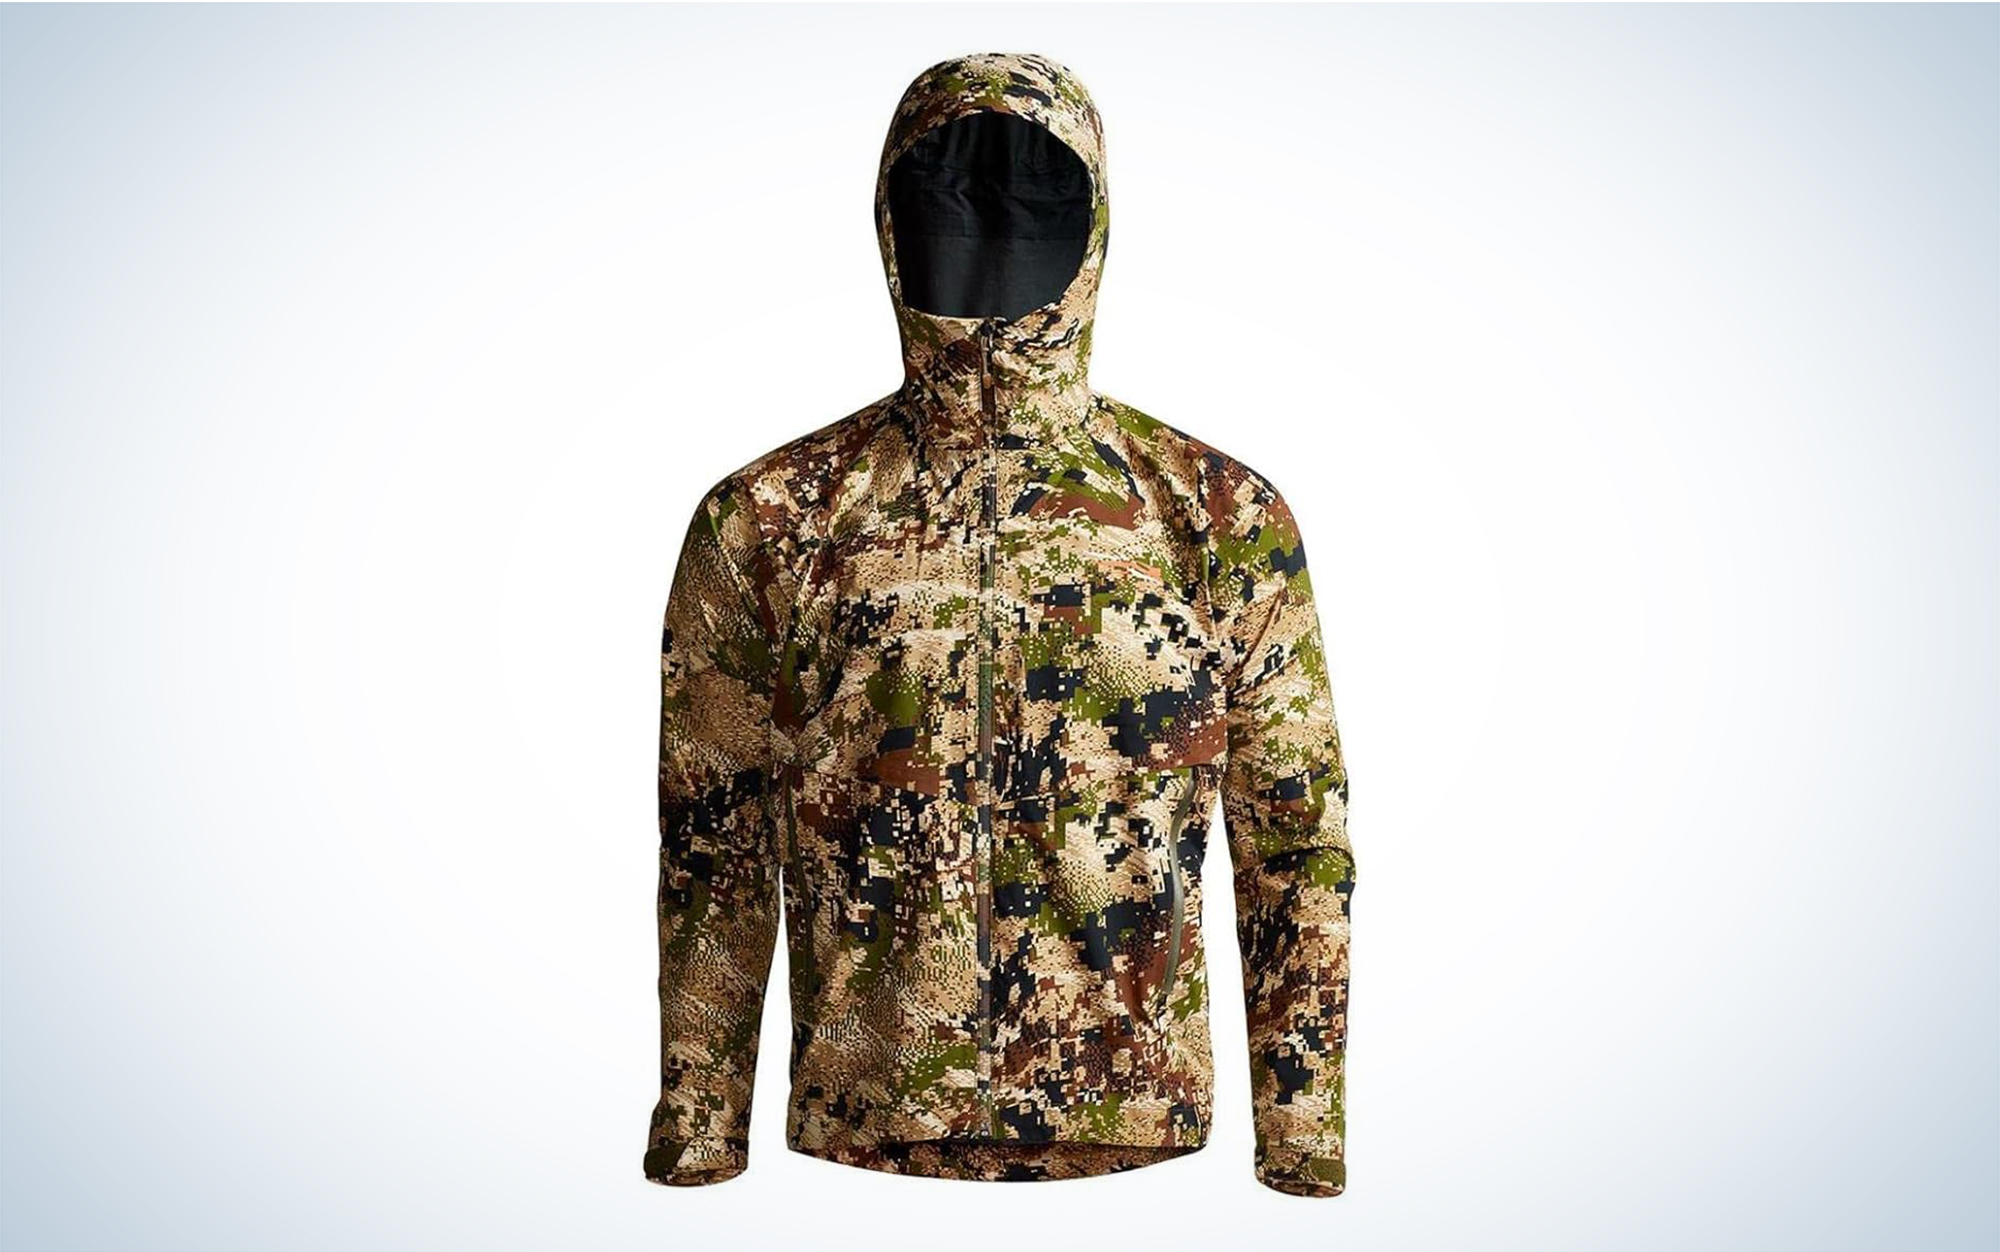 We tested the Sitka Dewpoint Jacket.